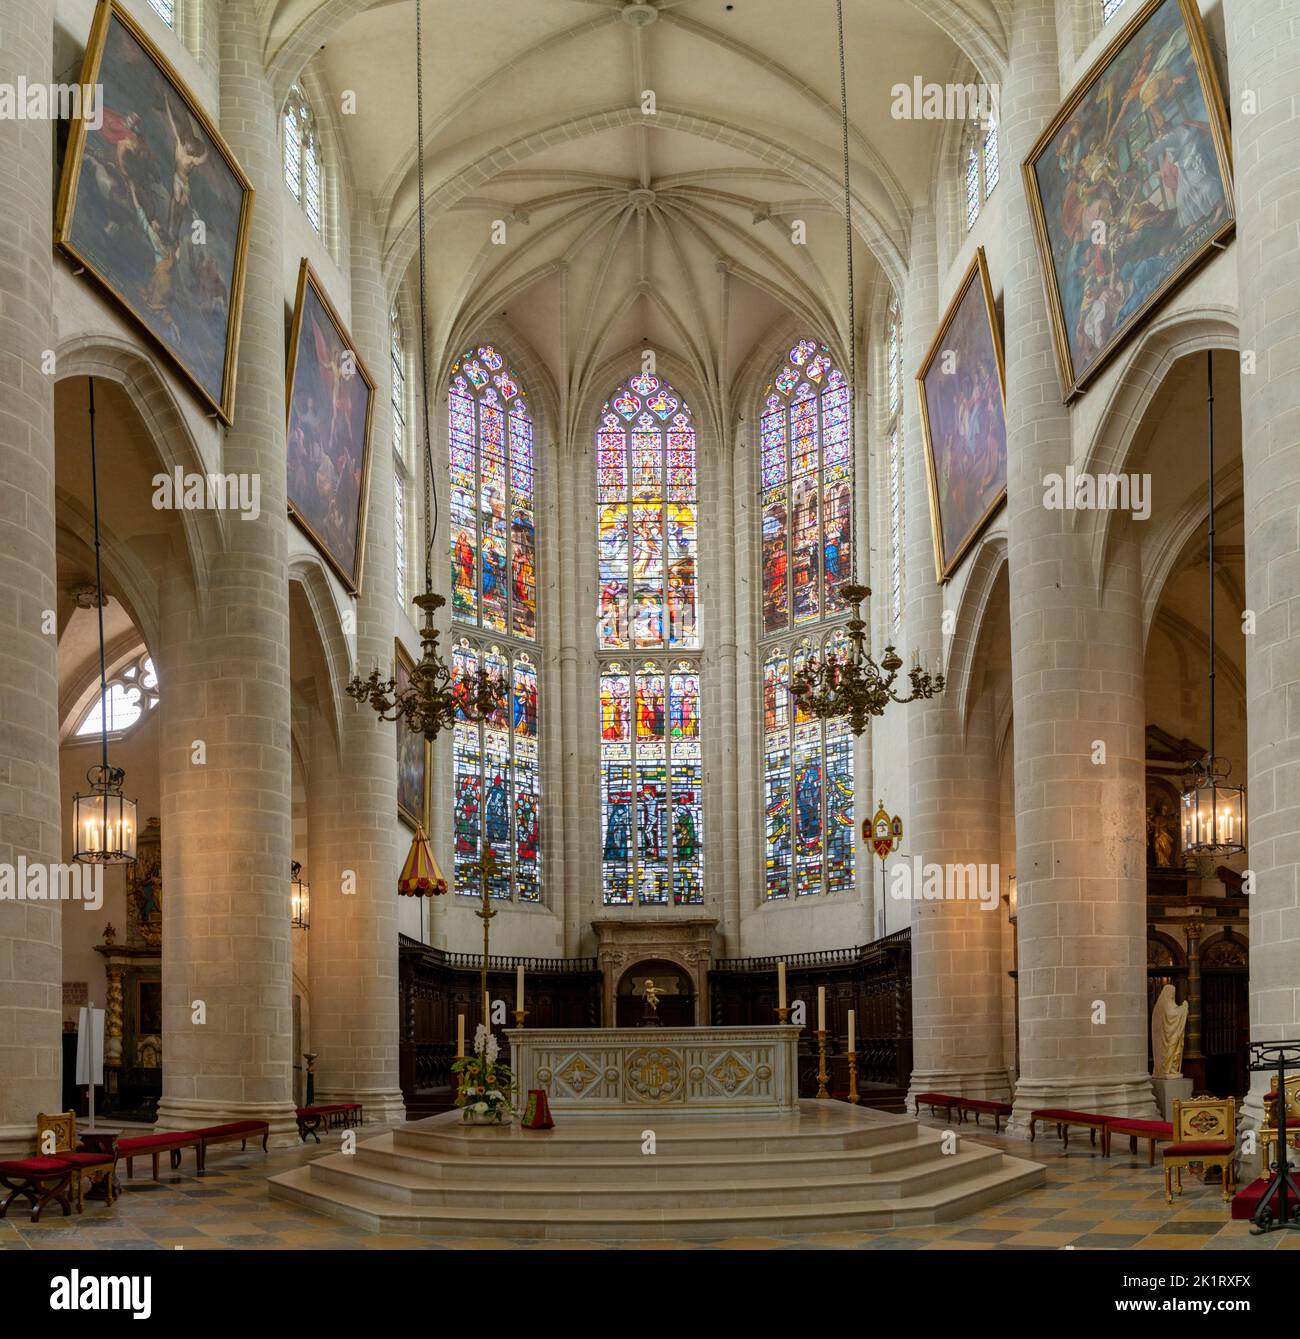 Dole, France - 14 September, 2022: interior view of the altar and central nave of the Collegiale Notre Dame church in Dole Stock Photo